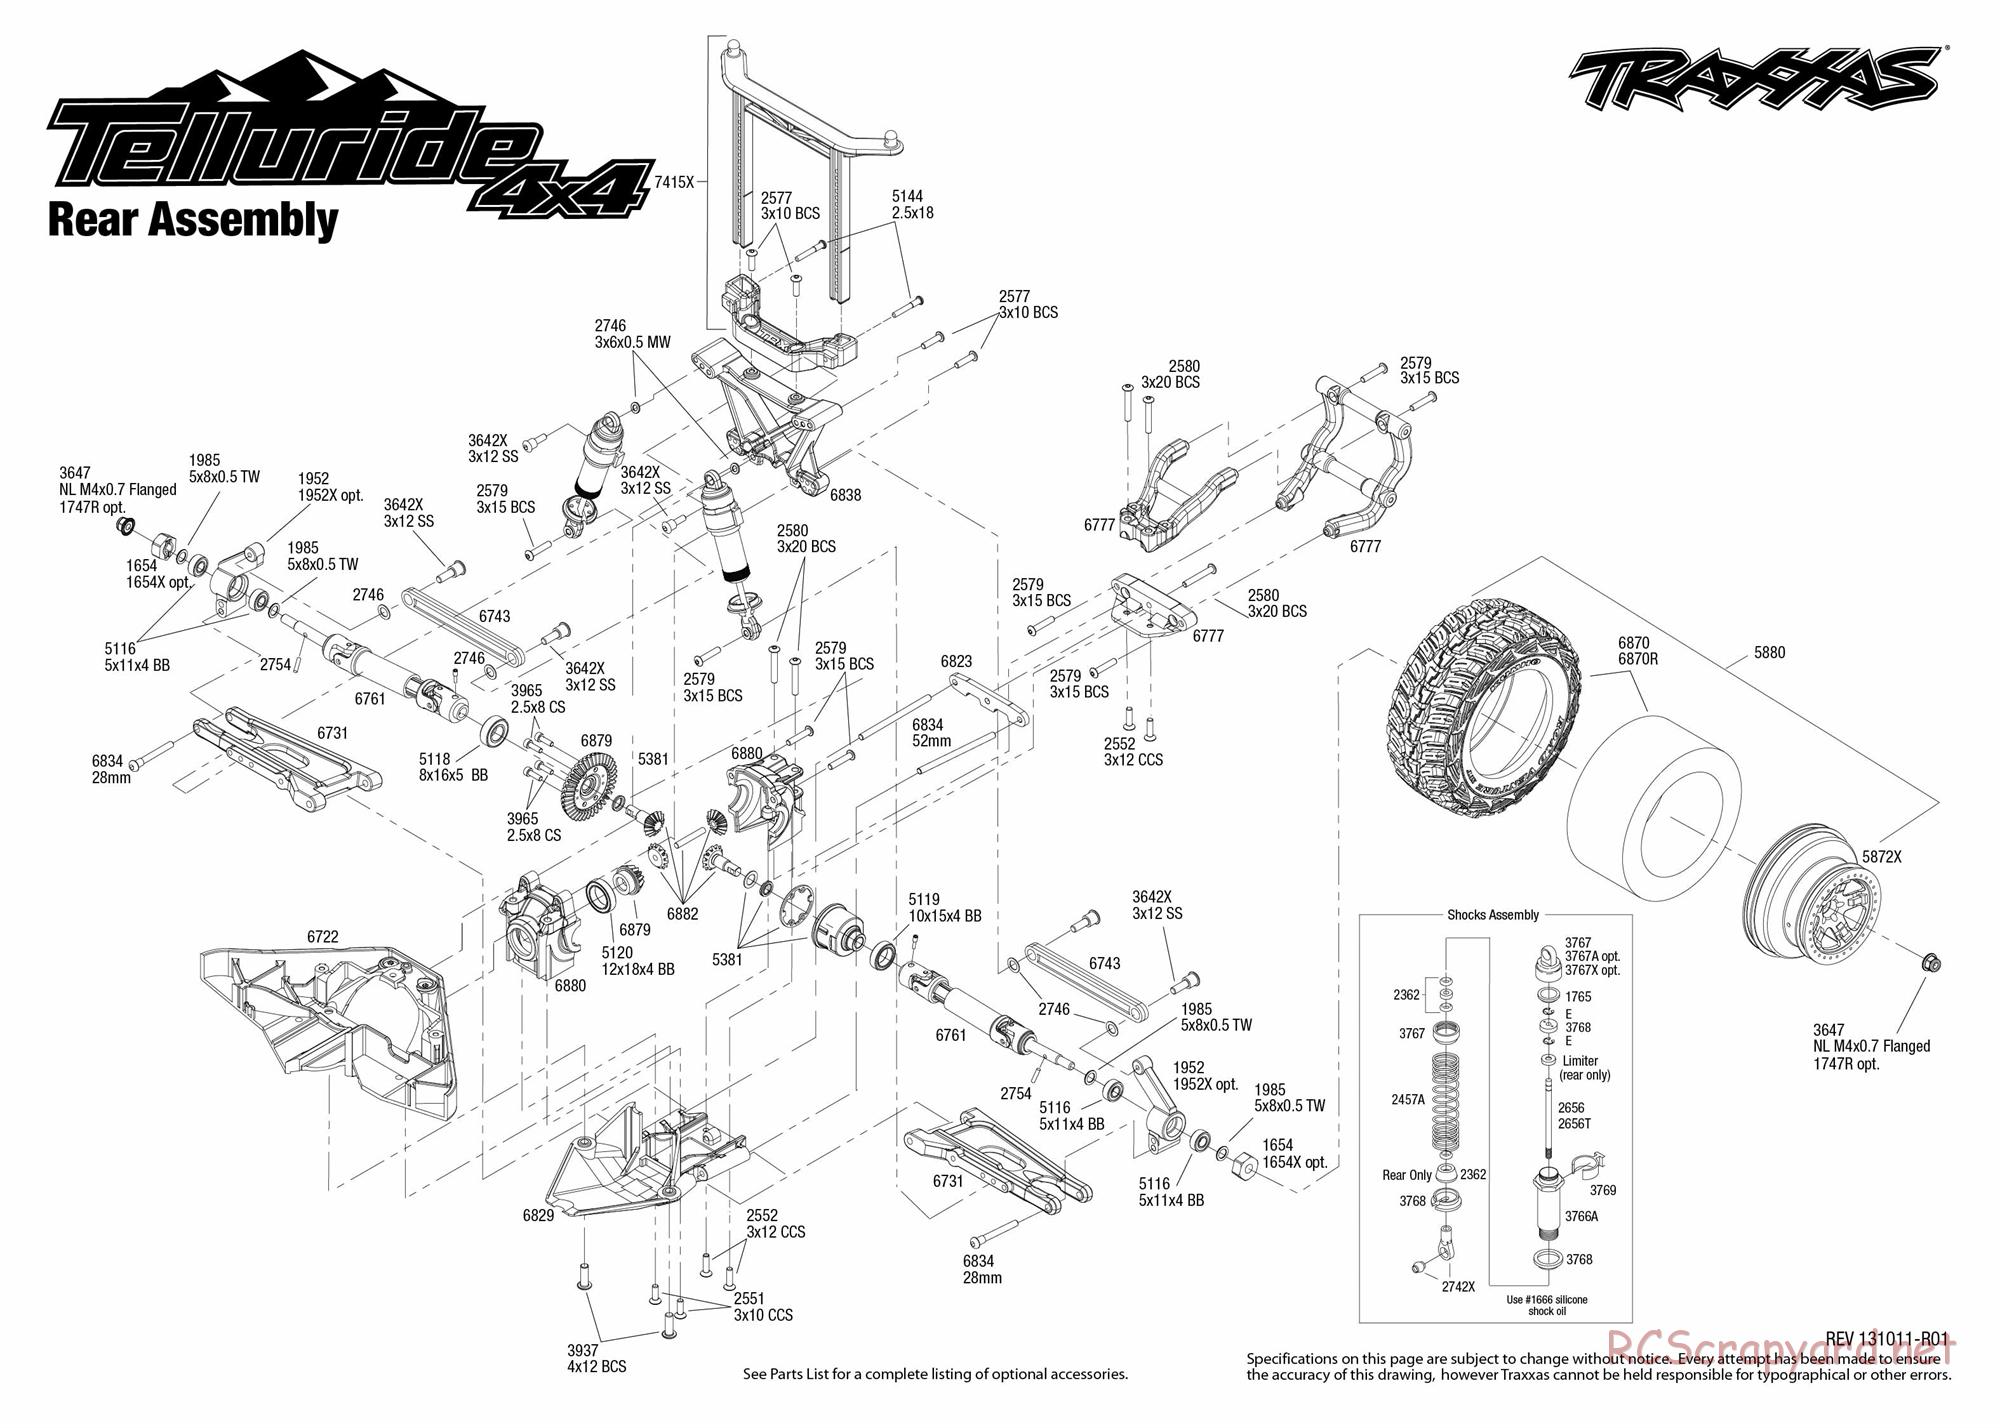 Traxxas - Telluride 4x4 (2013) - Exploded Views - Page 4